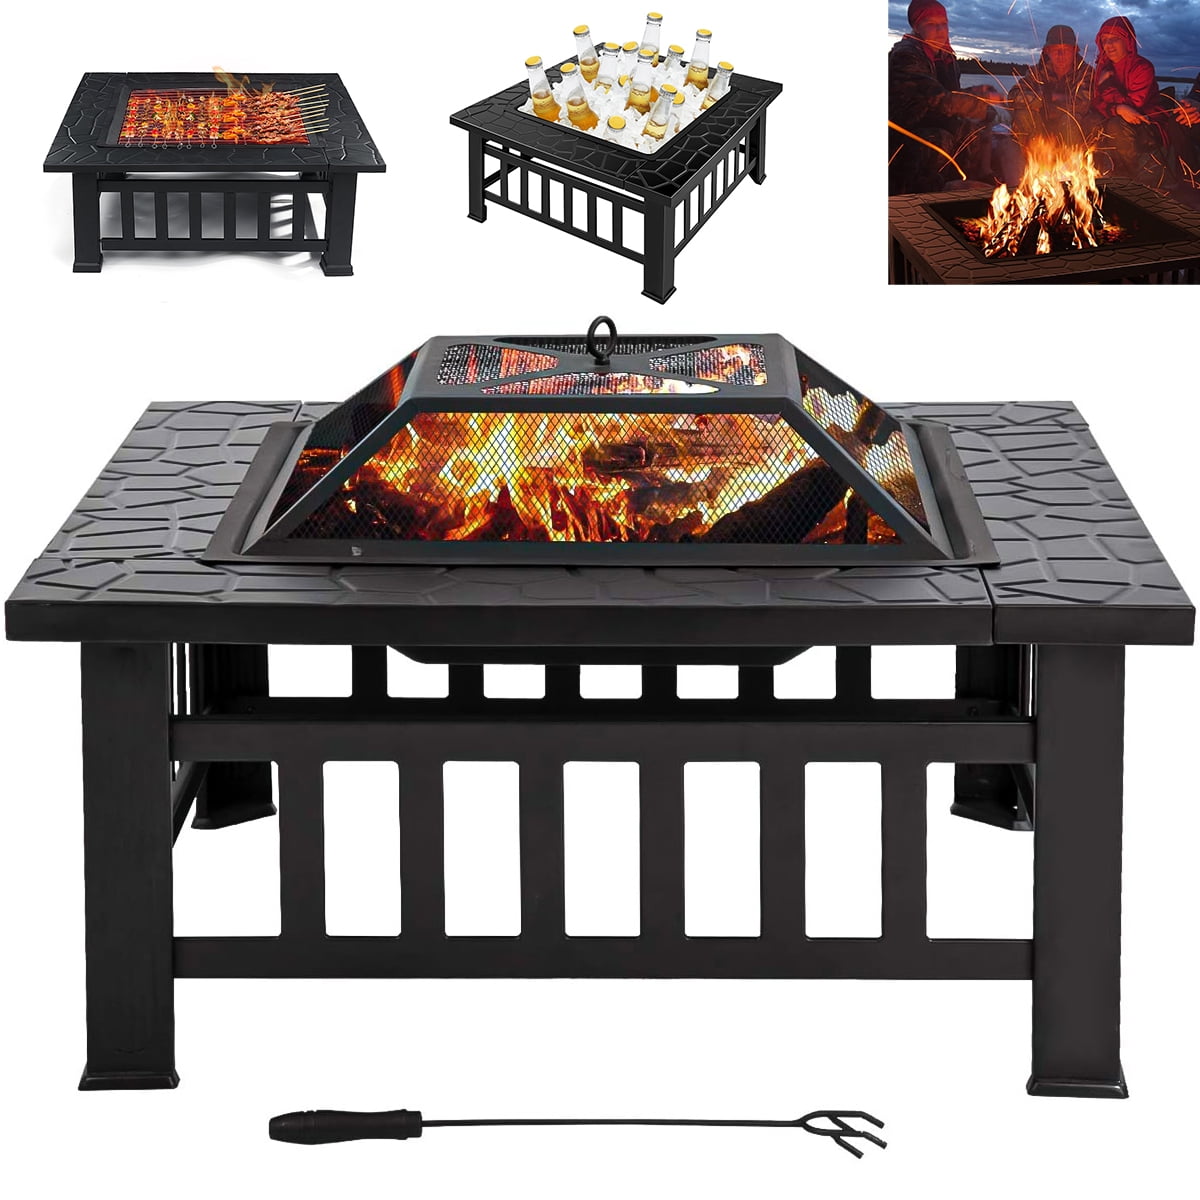 Poker 4 in 1 Square Bowl Wood Burning Fireplace Grill Spark Screen Dining Cover Log Grate 32 Fire Pit Table Outdoor Set Heater Stove/BBQ/Ice Pit Patio Garden Backyard Firepit Mesh Lid 